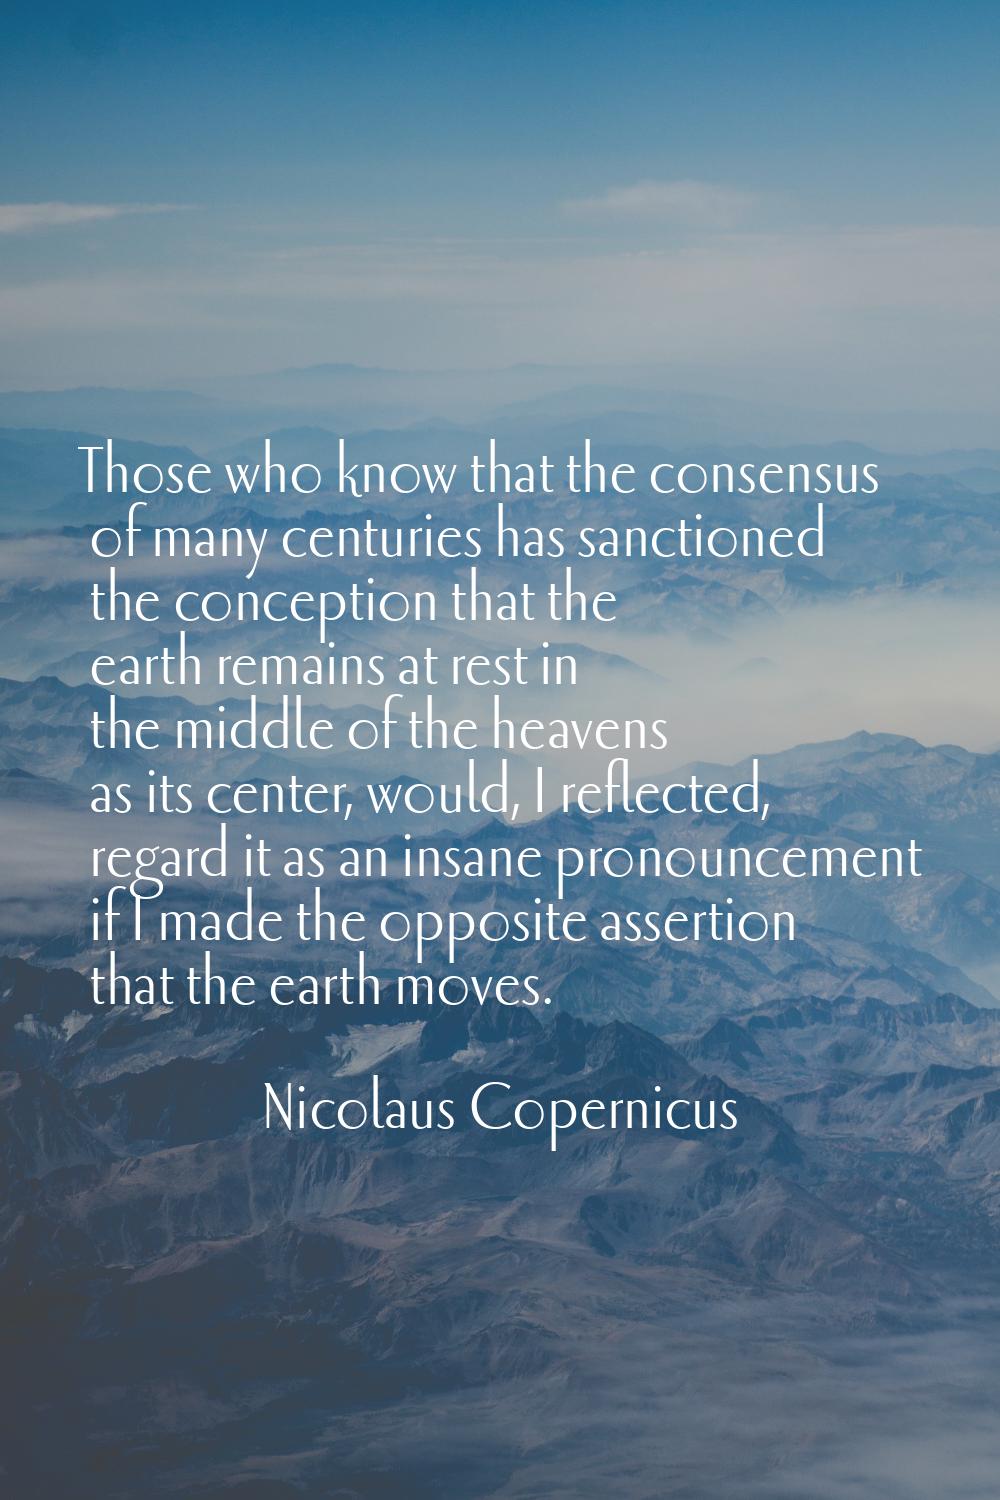 Those who know that the consensus of many centuries has sanctioned the conception that the earth re